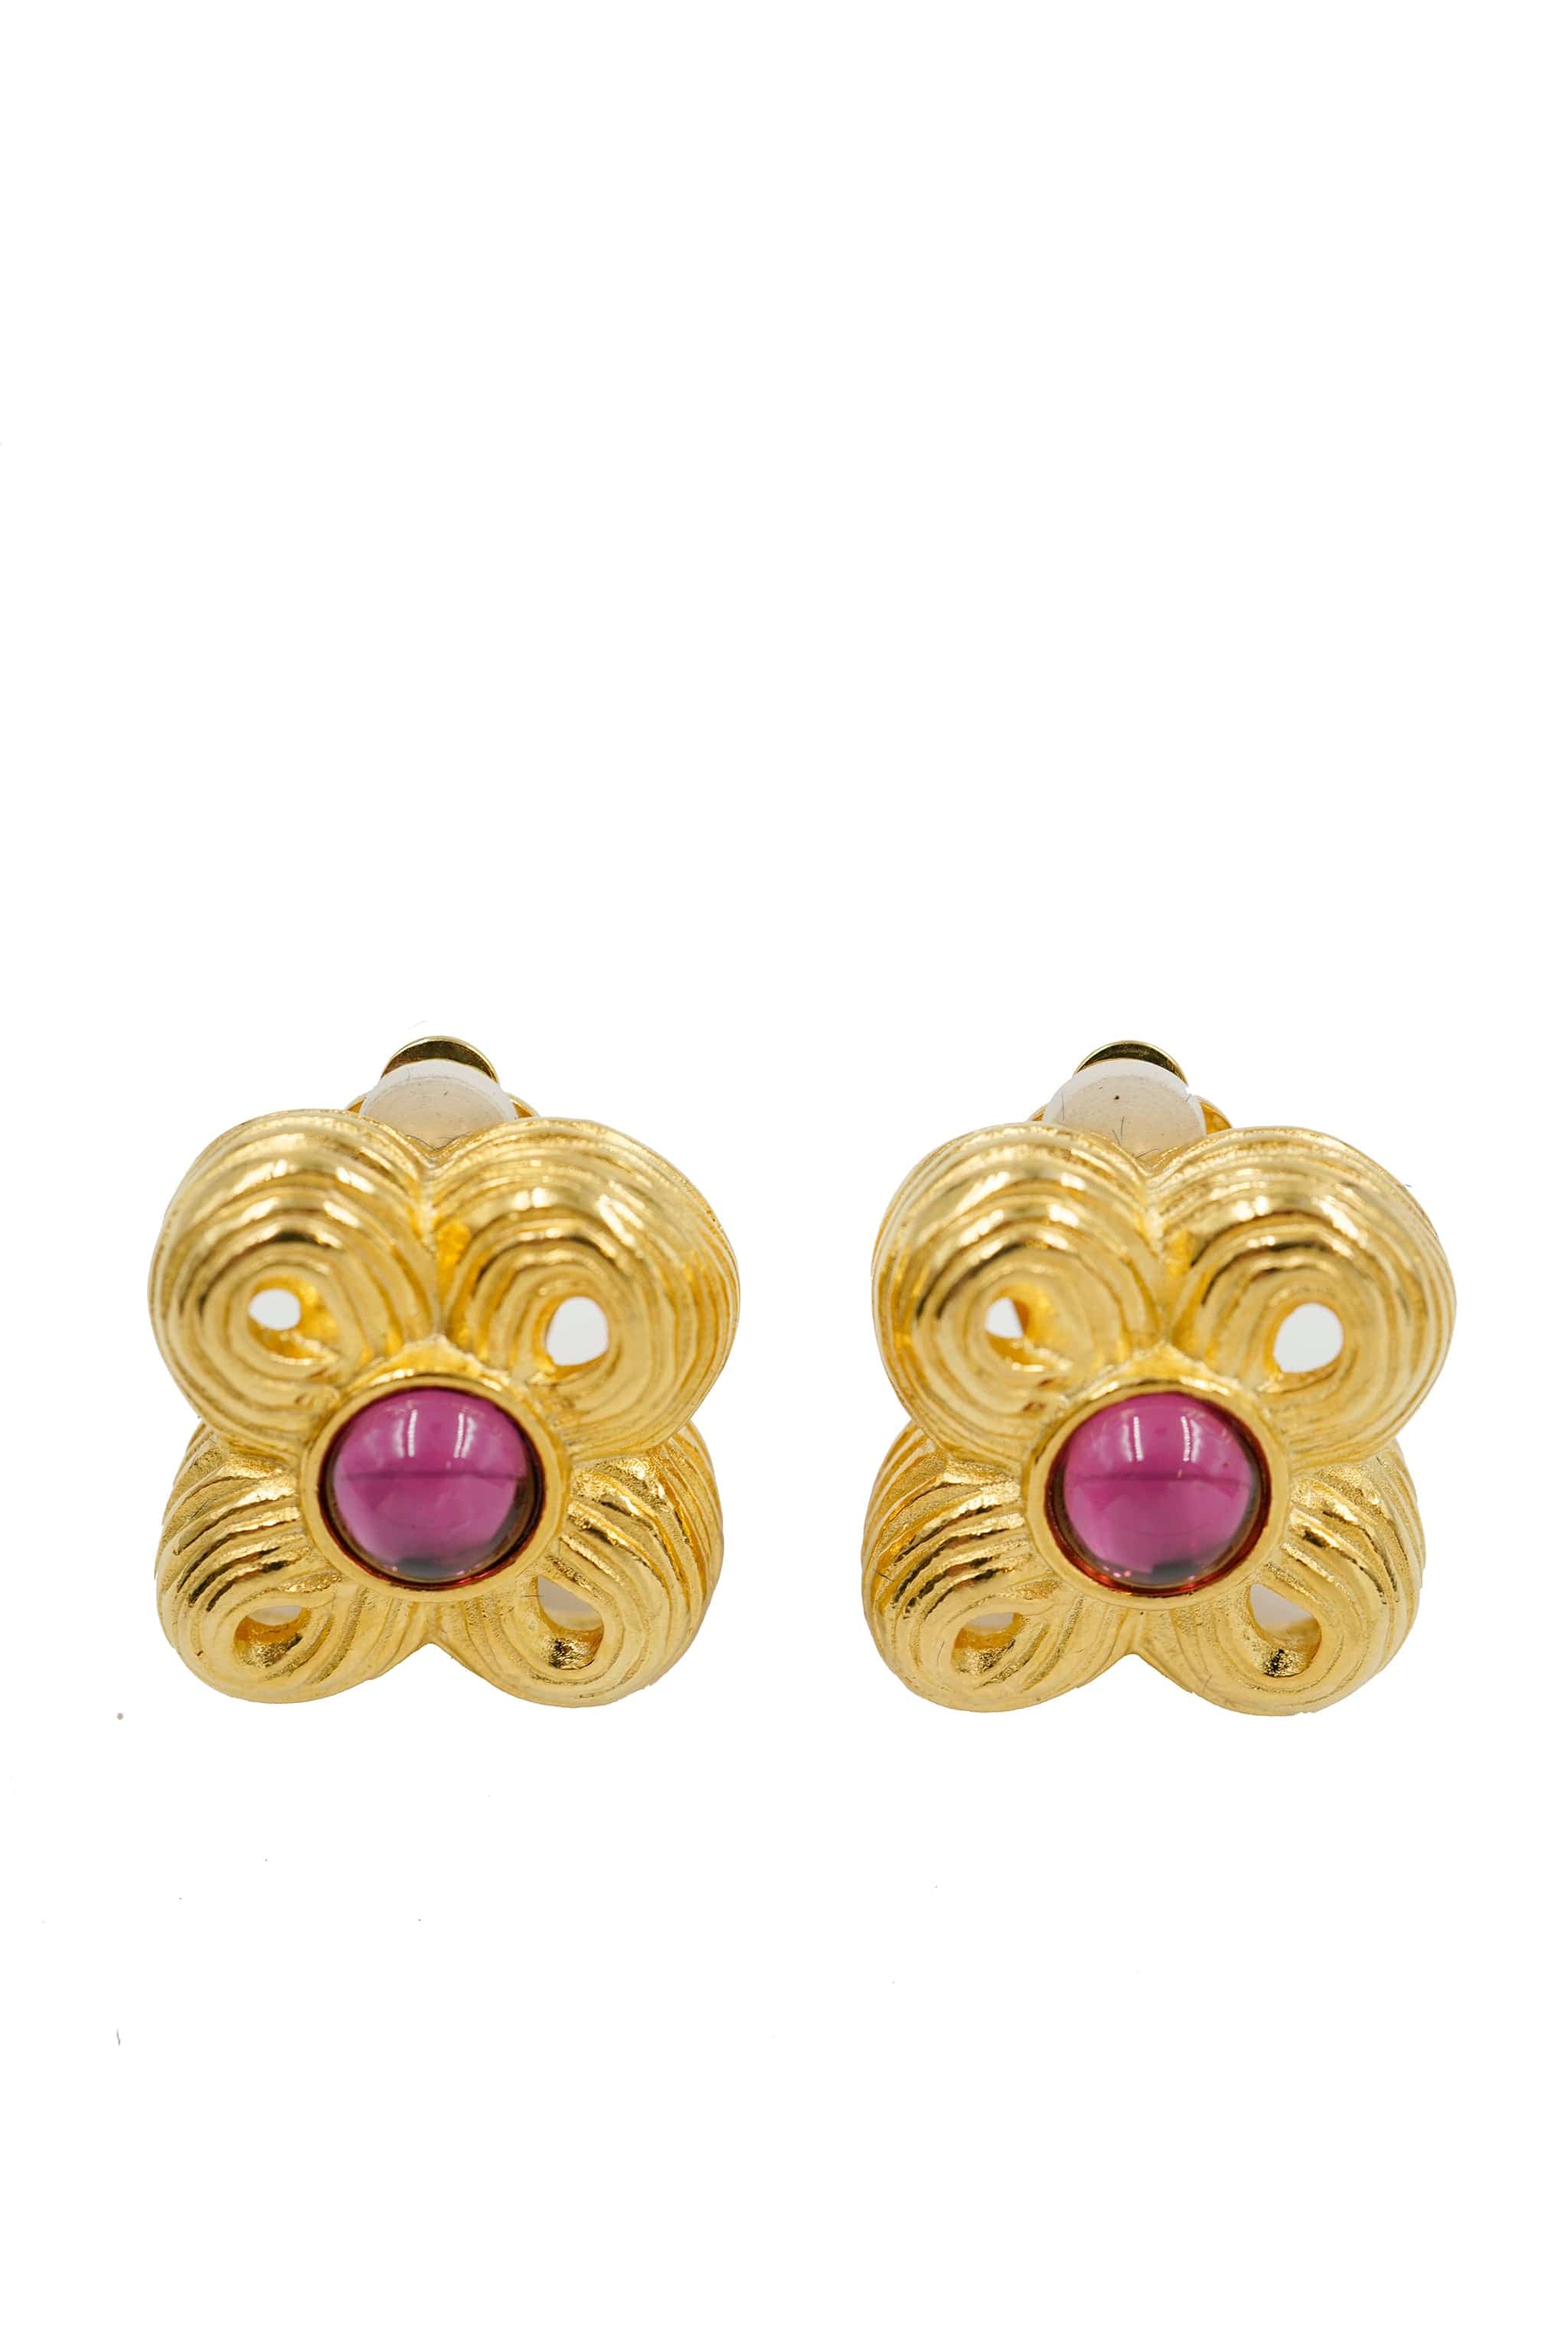 Givenchy Givenchy 4 leaf clover style clips with fuchsia cabochon, with tag AEL1099